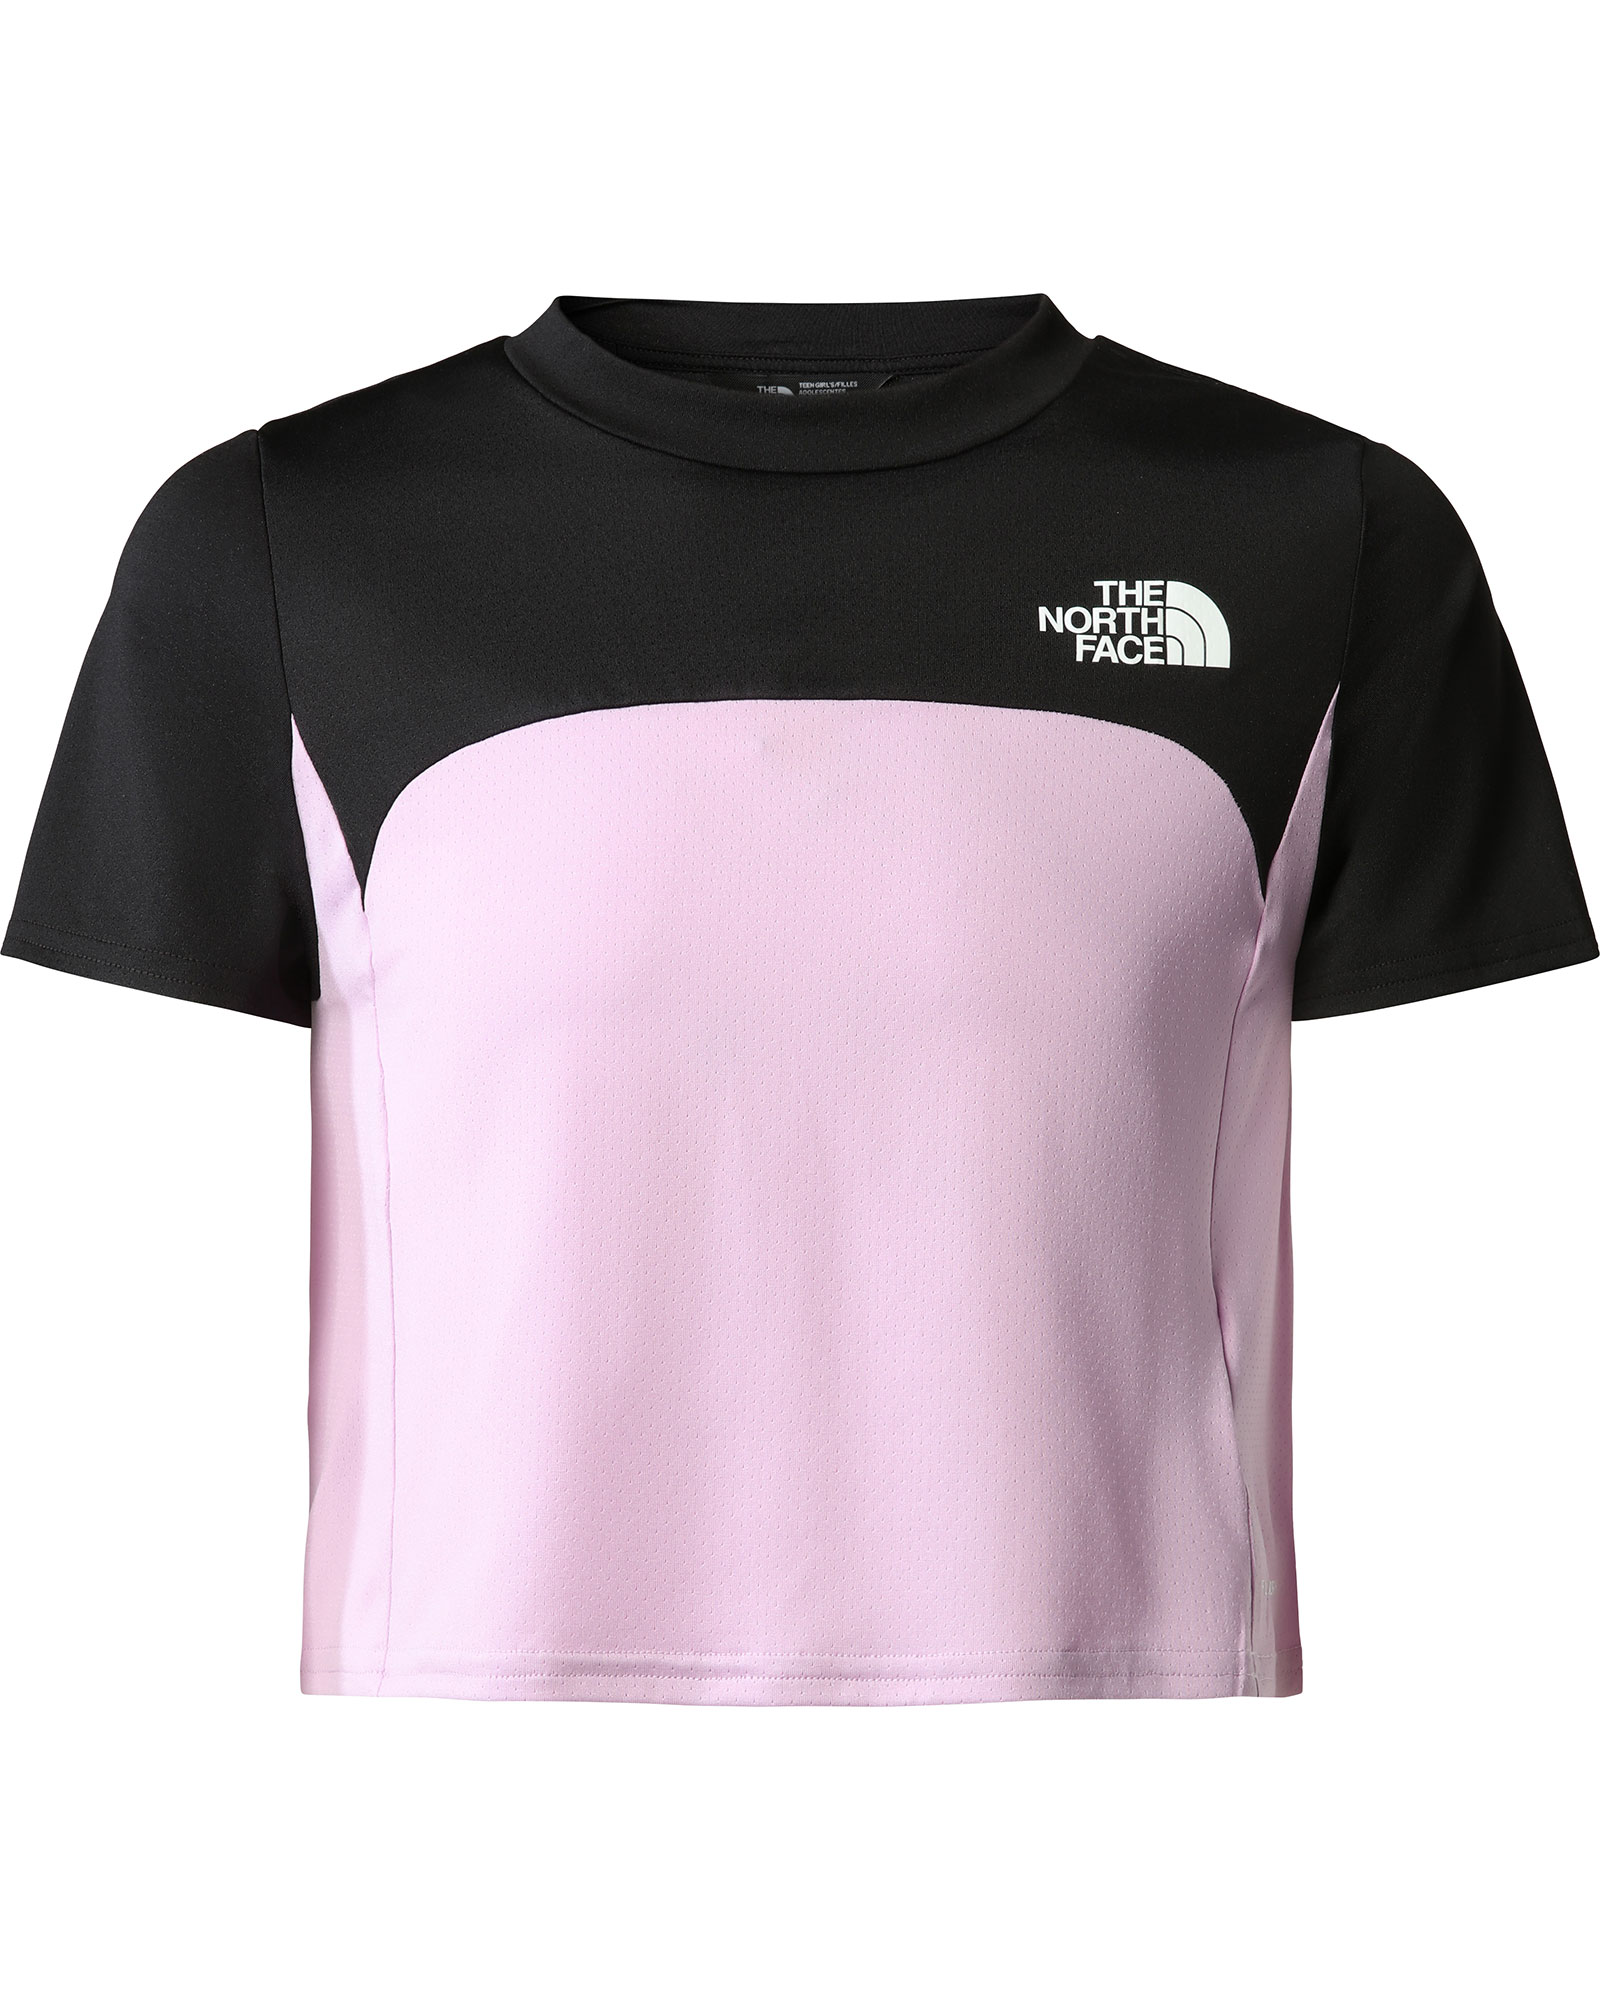 The North Face Girls Mountain Athletics T-shirt